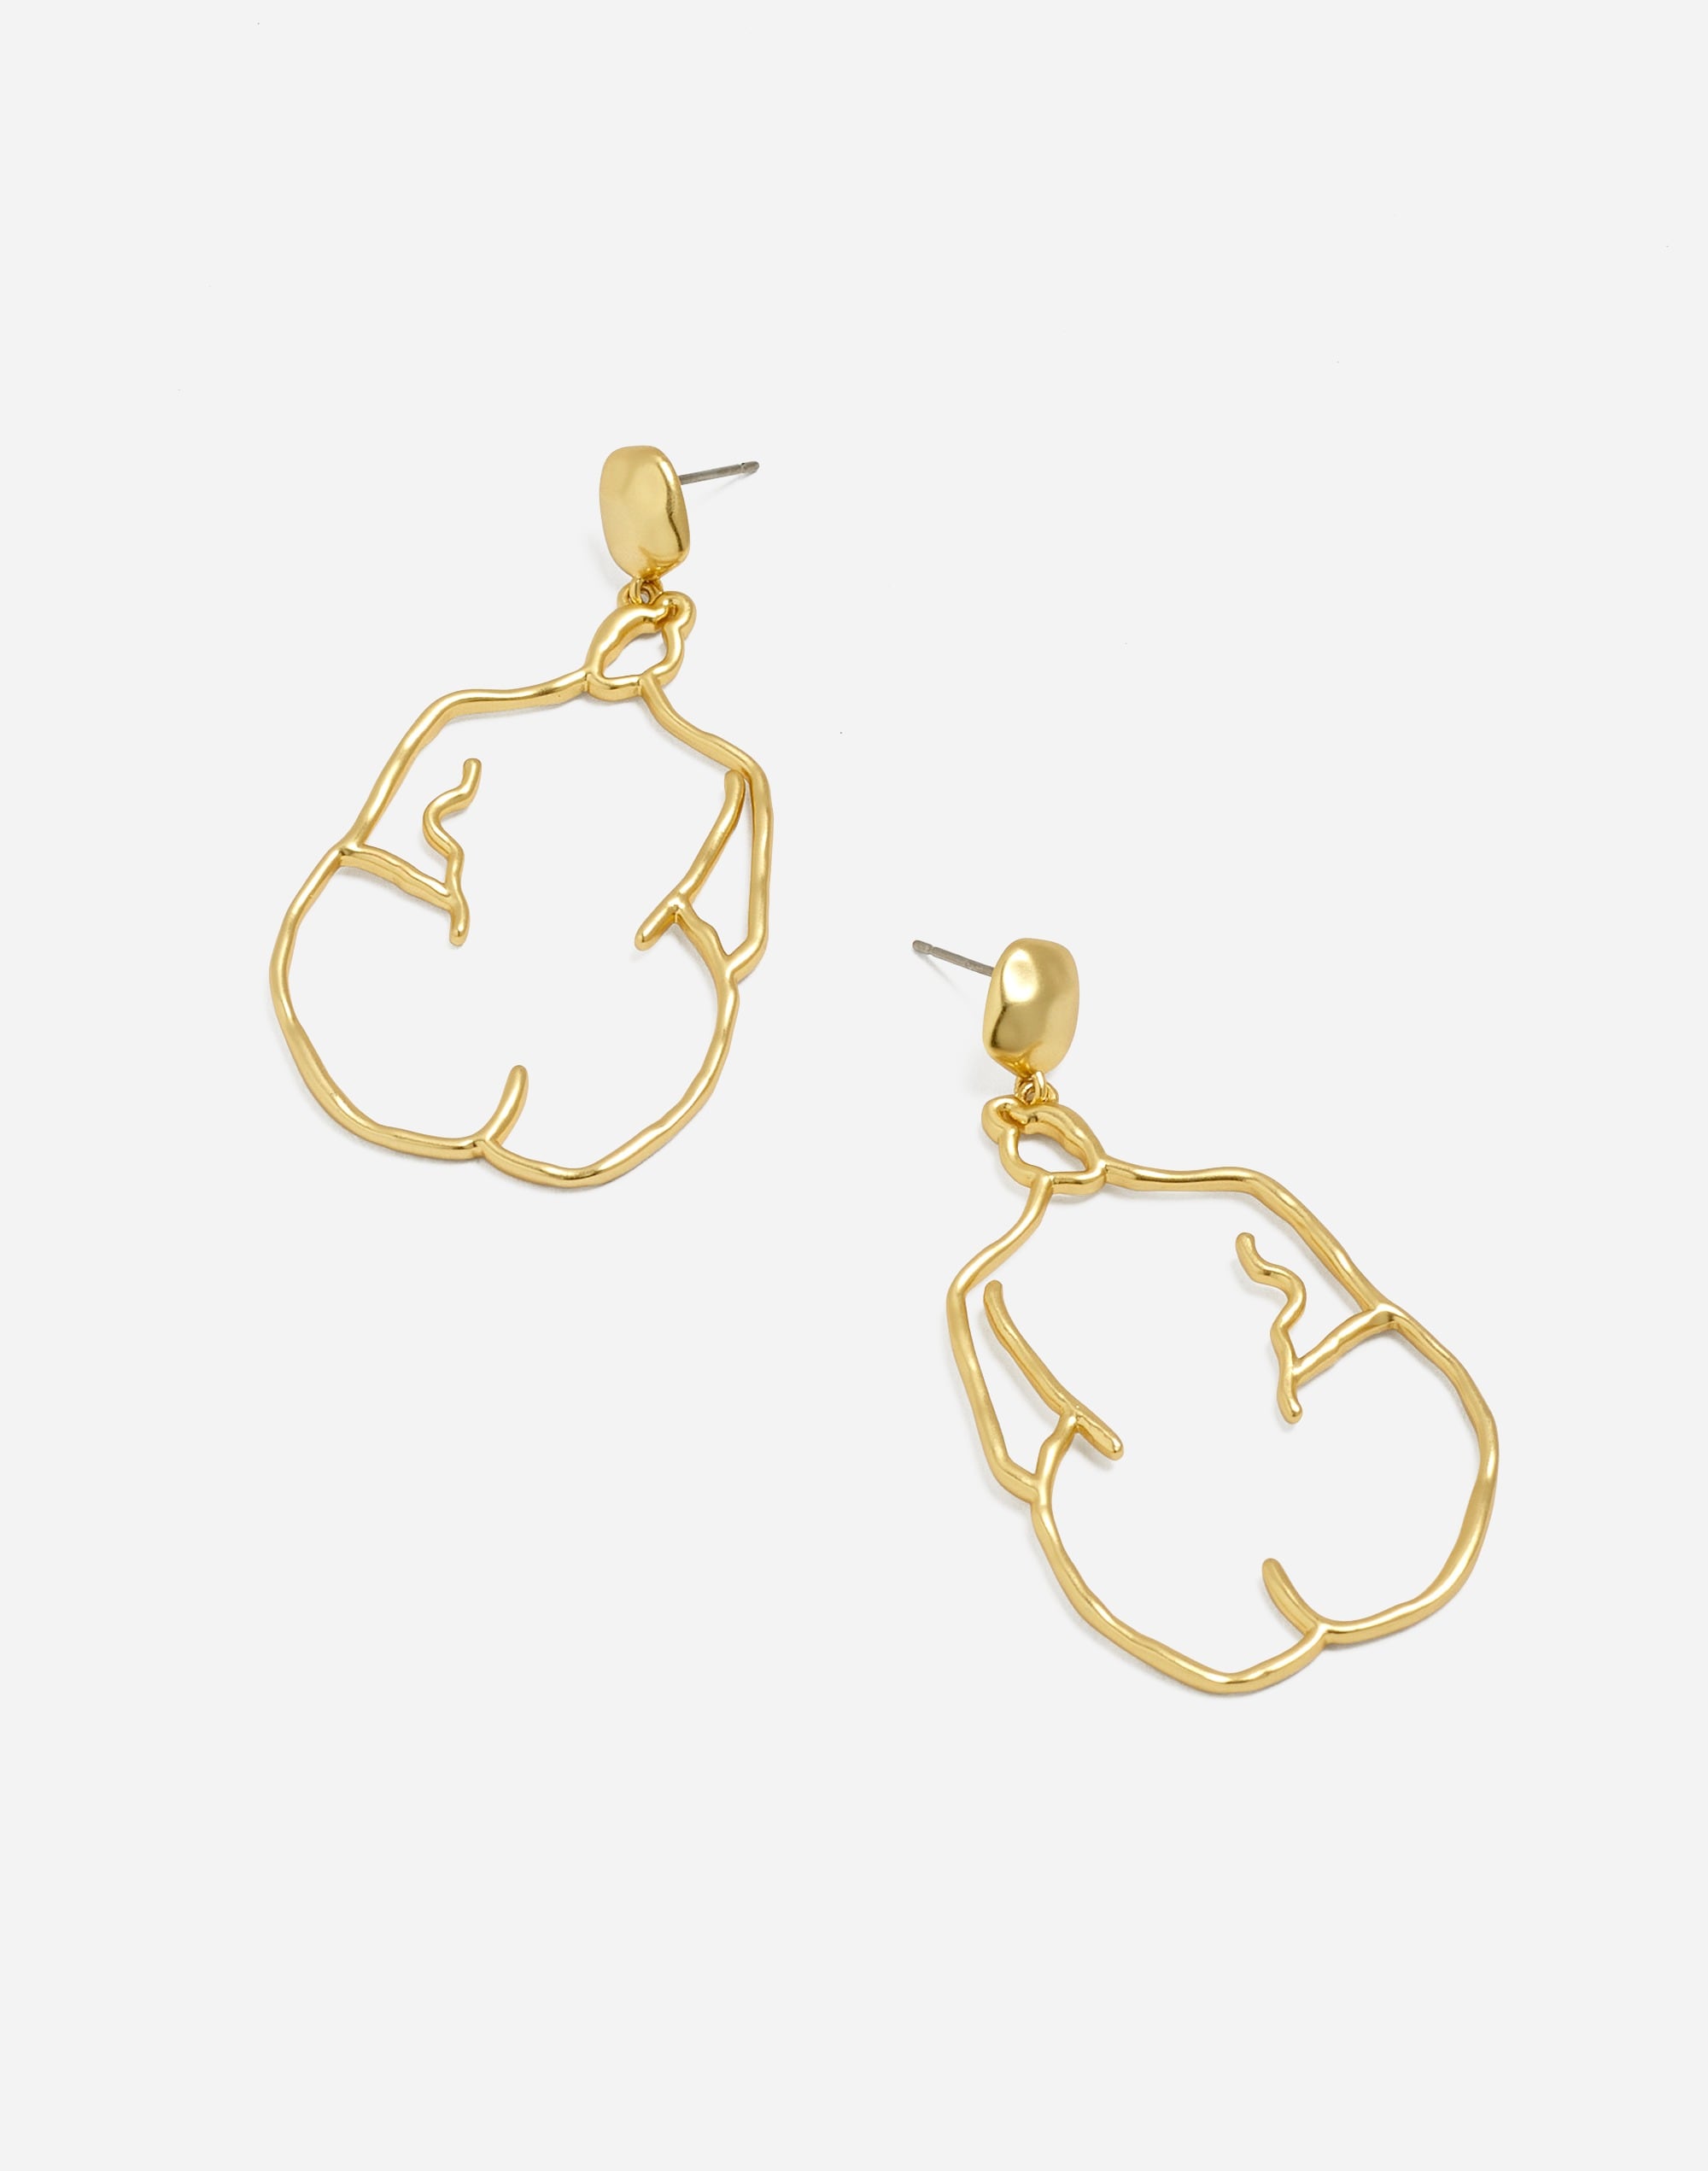 Madewell x Laetitia Rouget Statement Drop Earrings